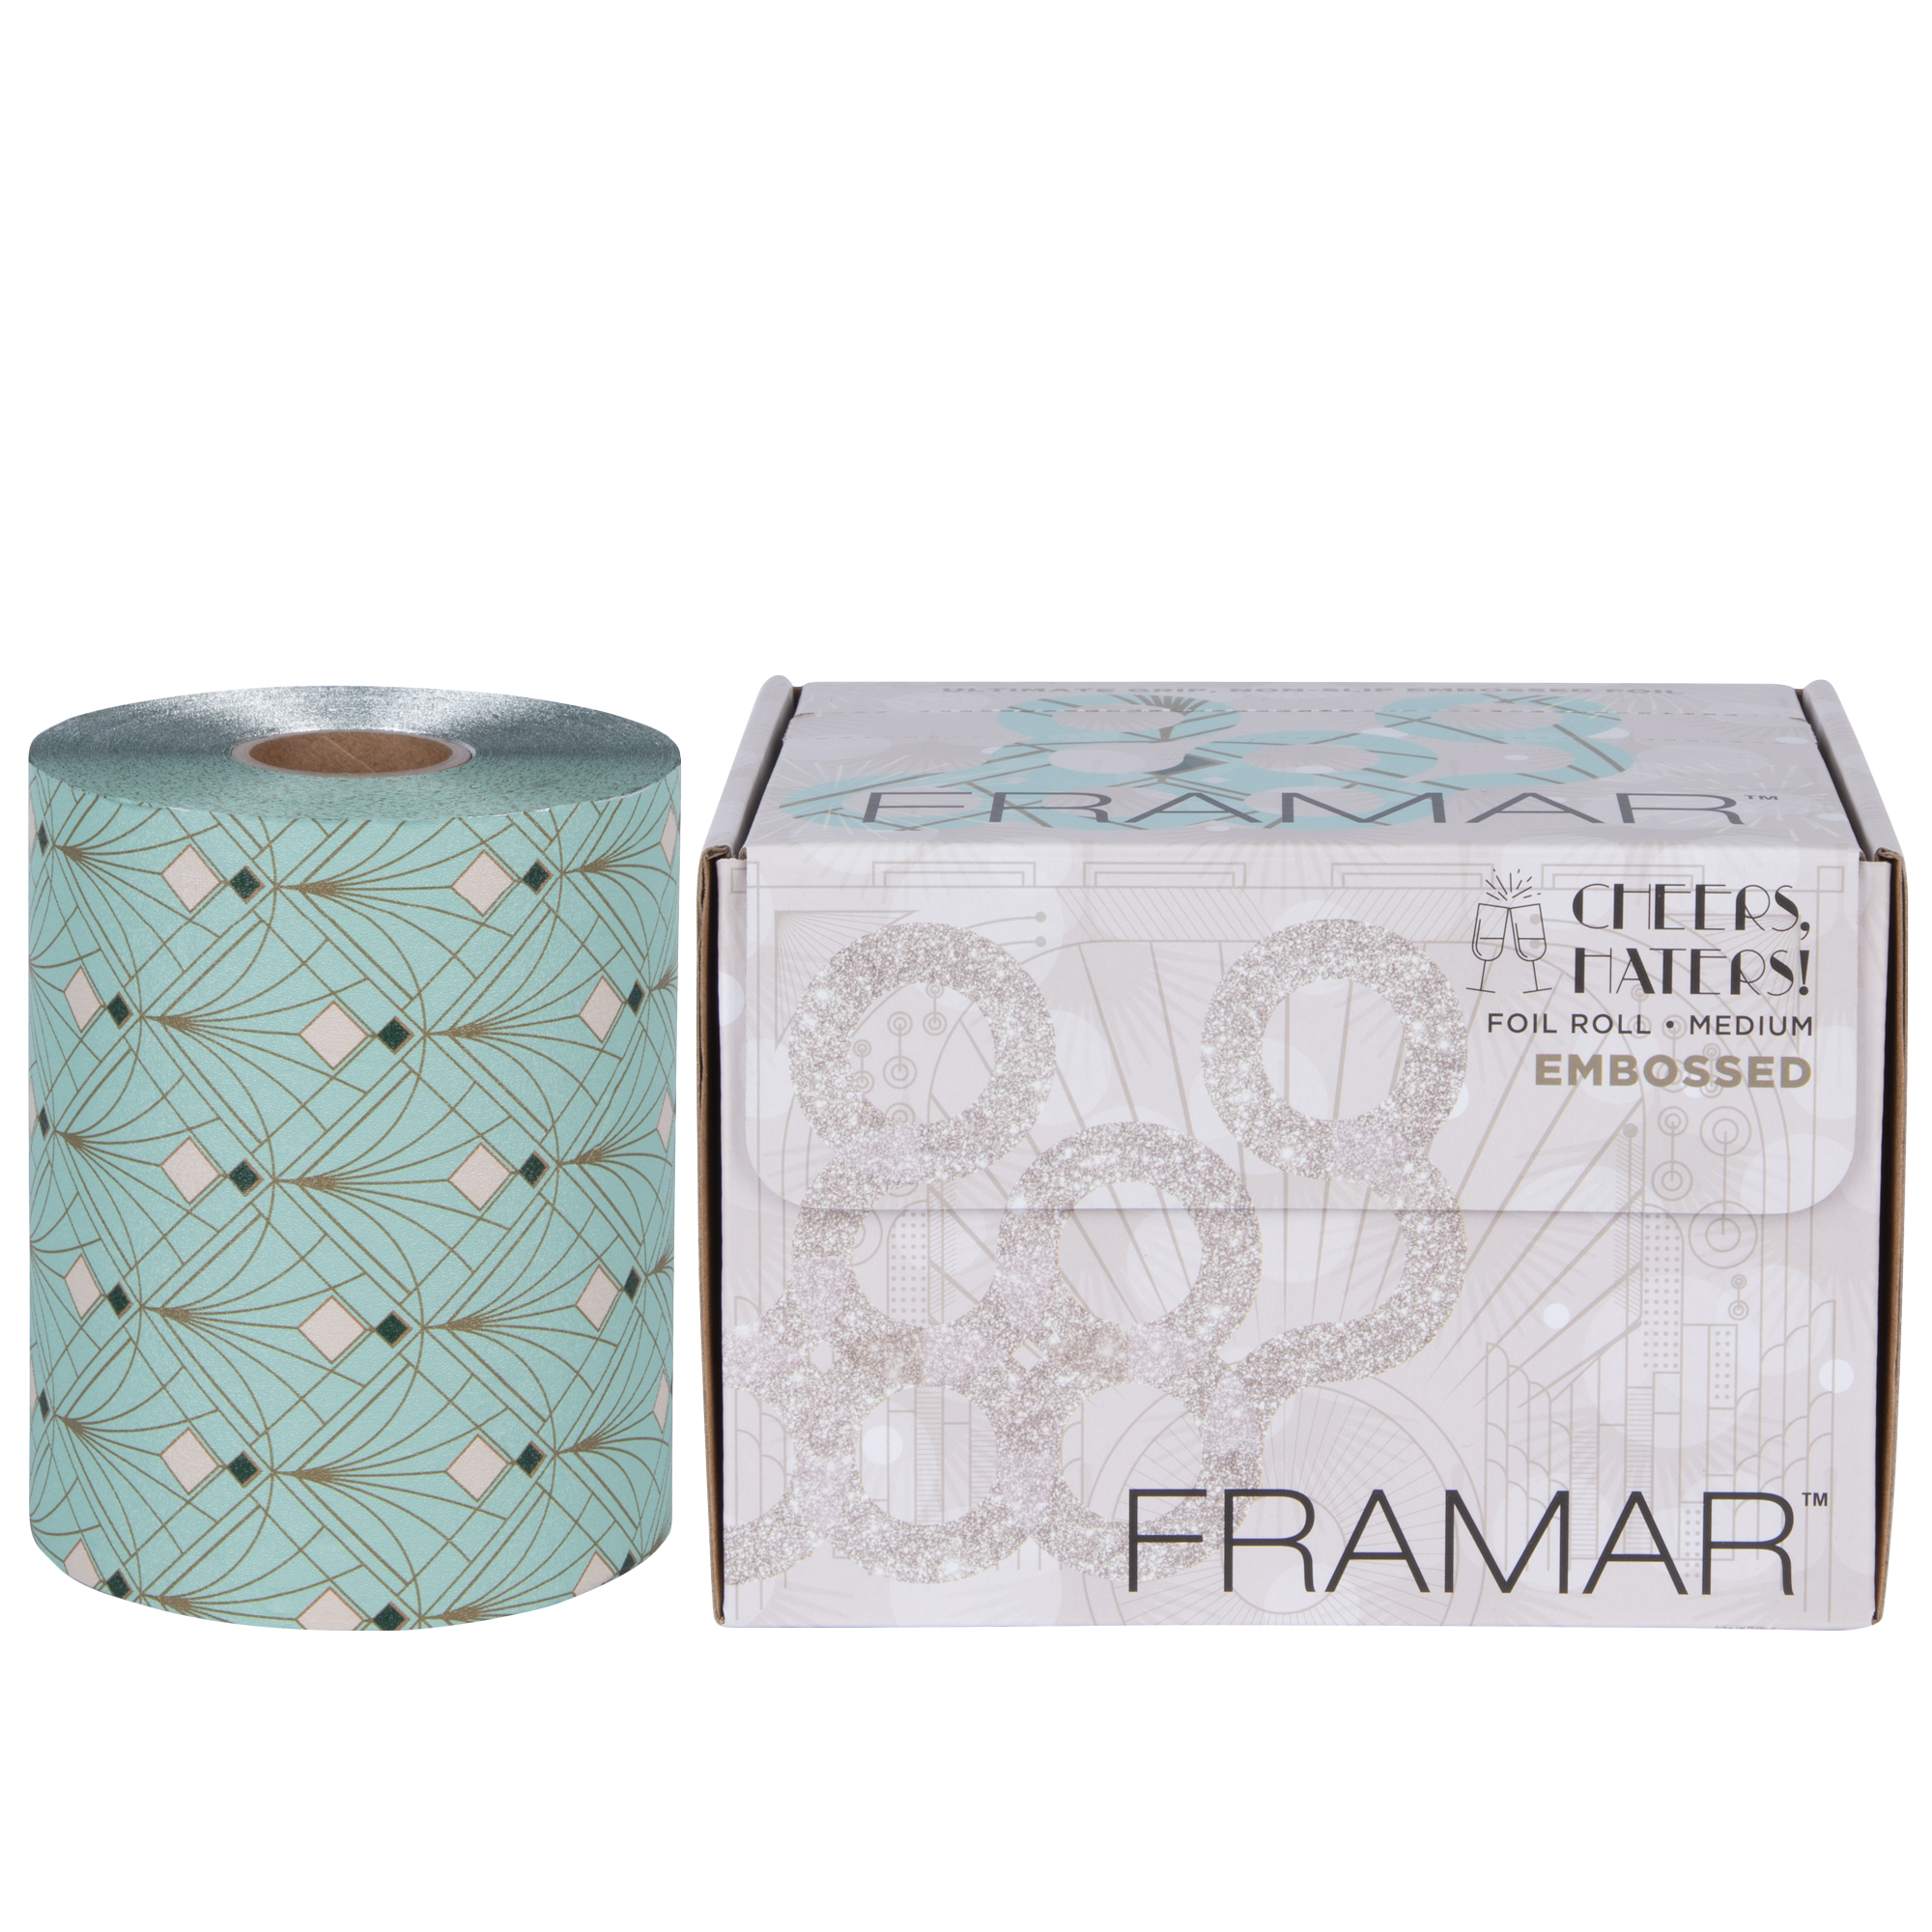 Framar FOIL: Cheers Haters Embossed Roll 320ft